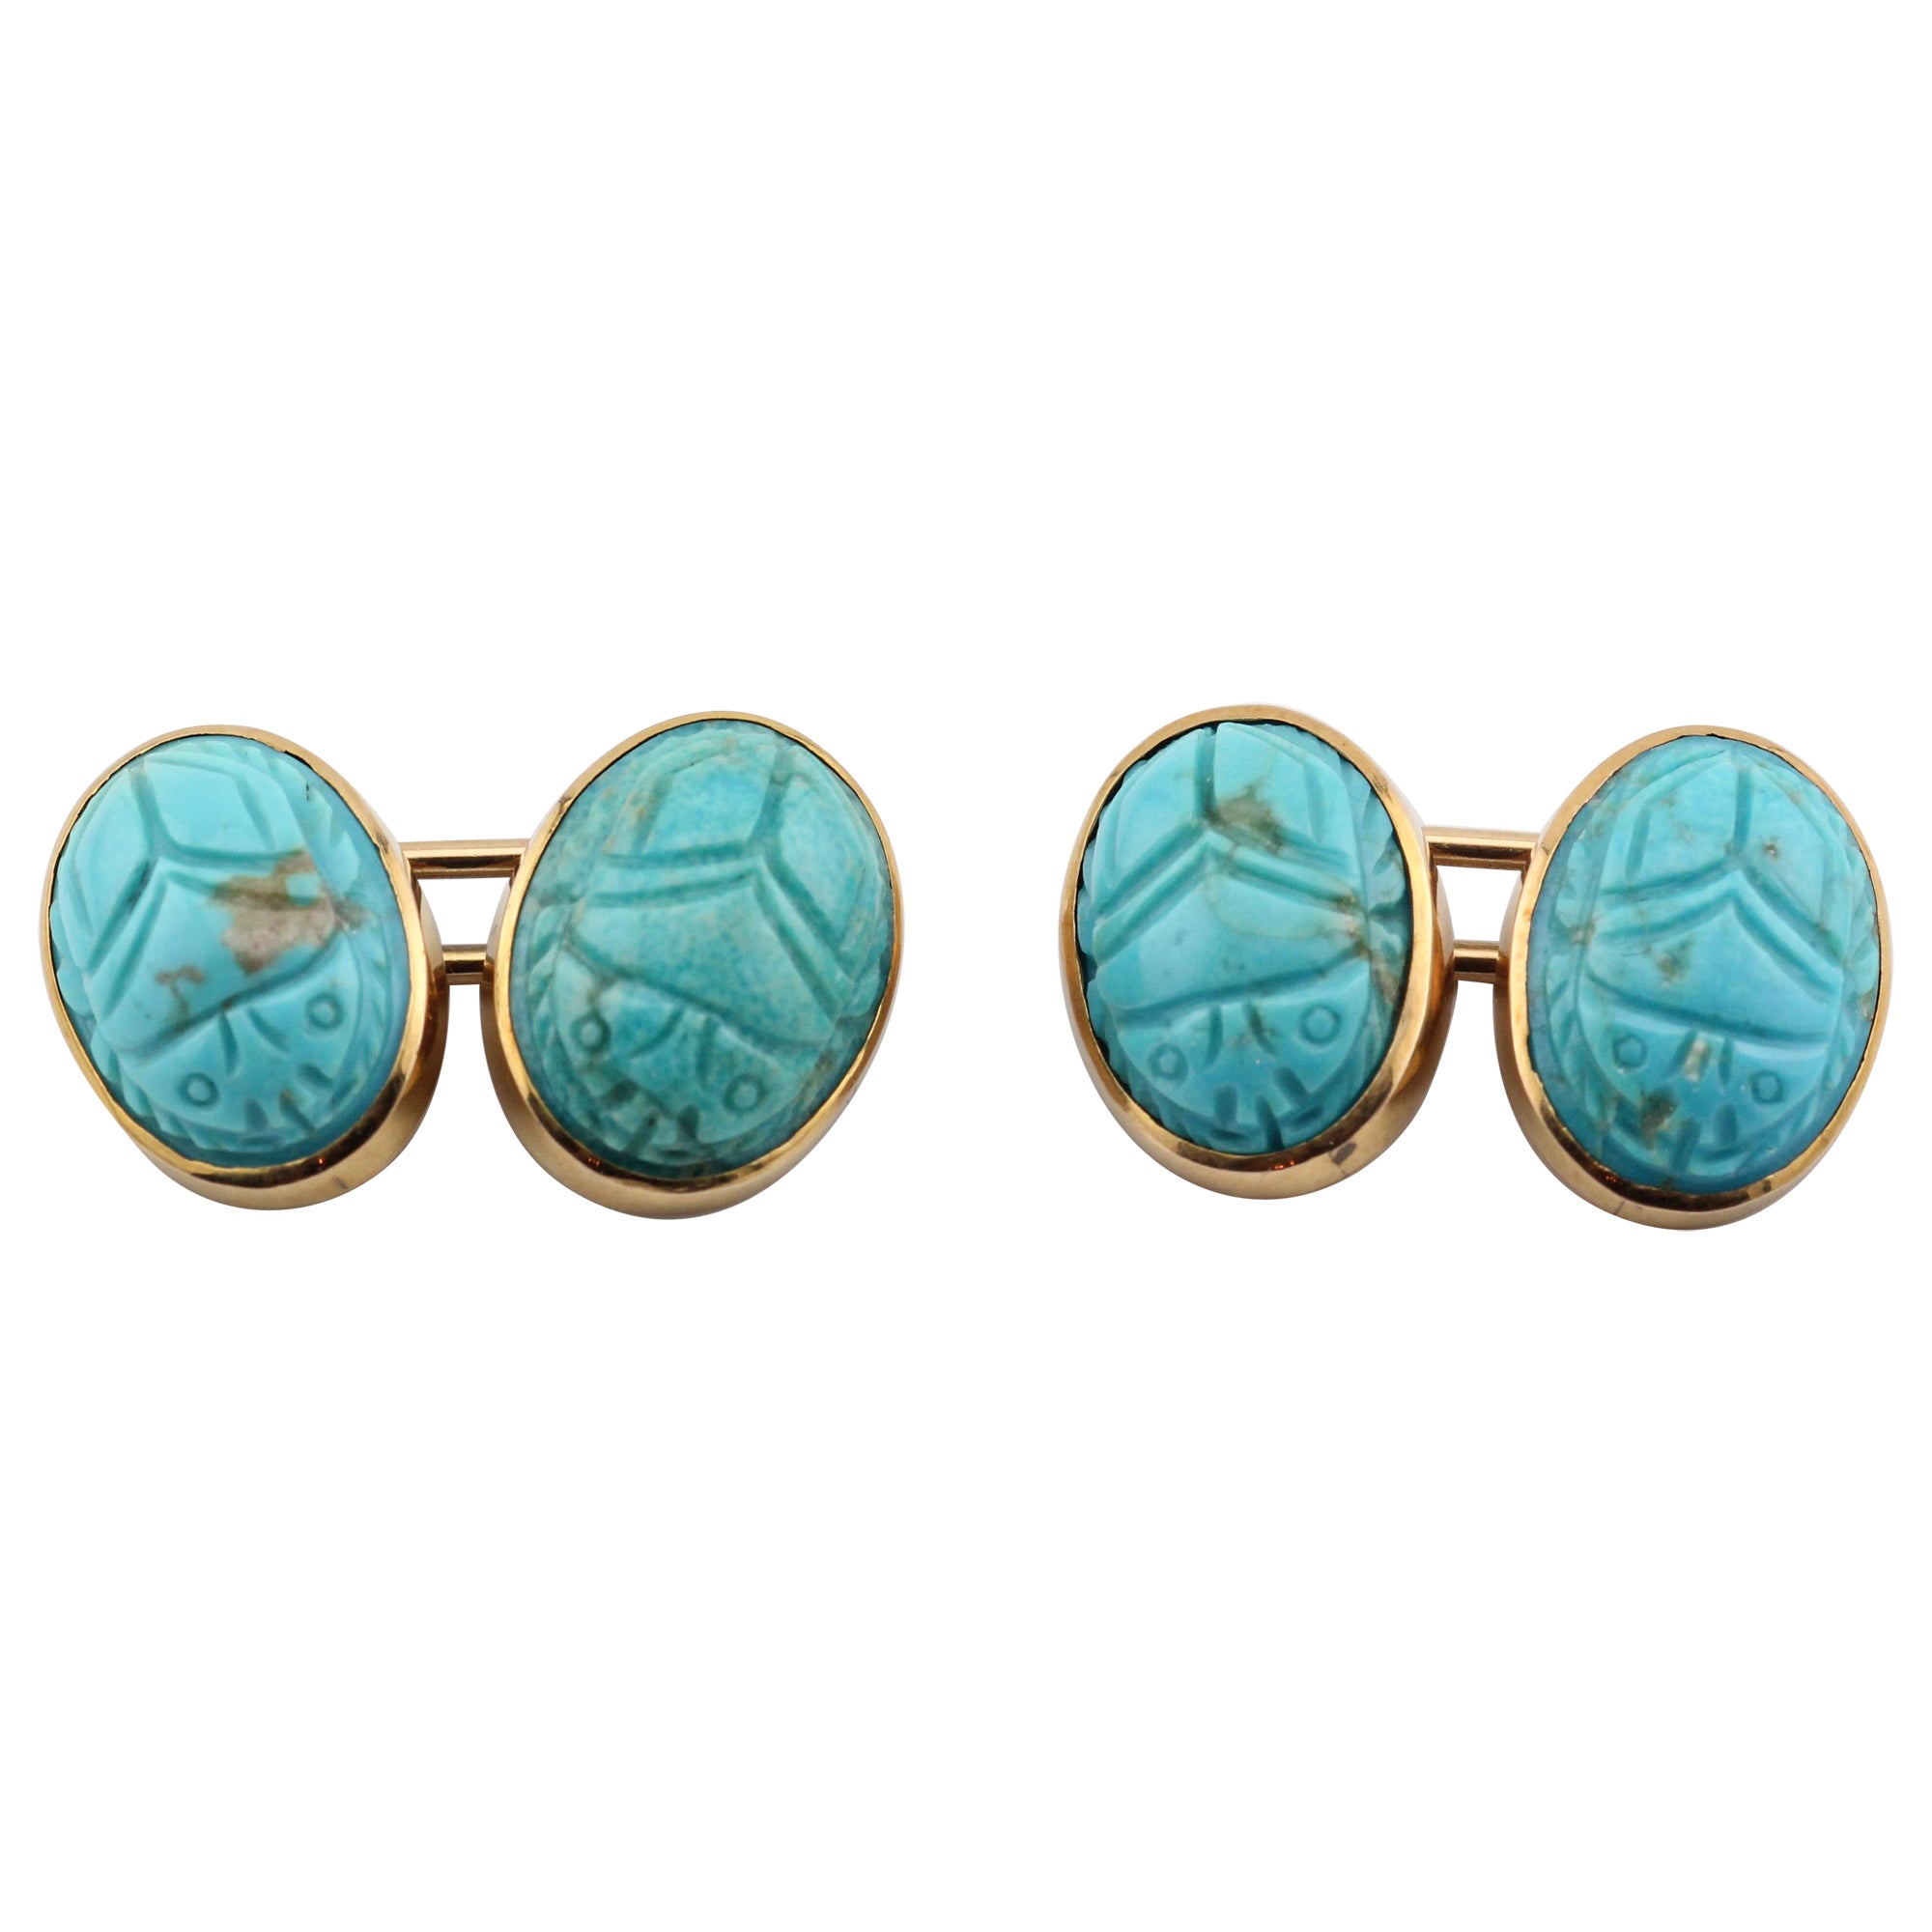 Shreve & Co. Vintage Scarab Cufflinks with Turquoise in 14k Gold For Sale